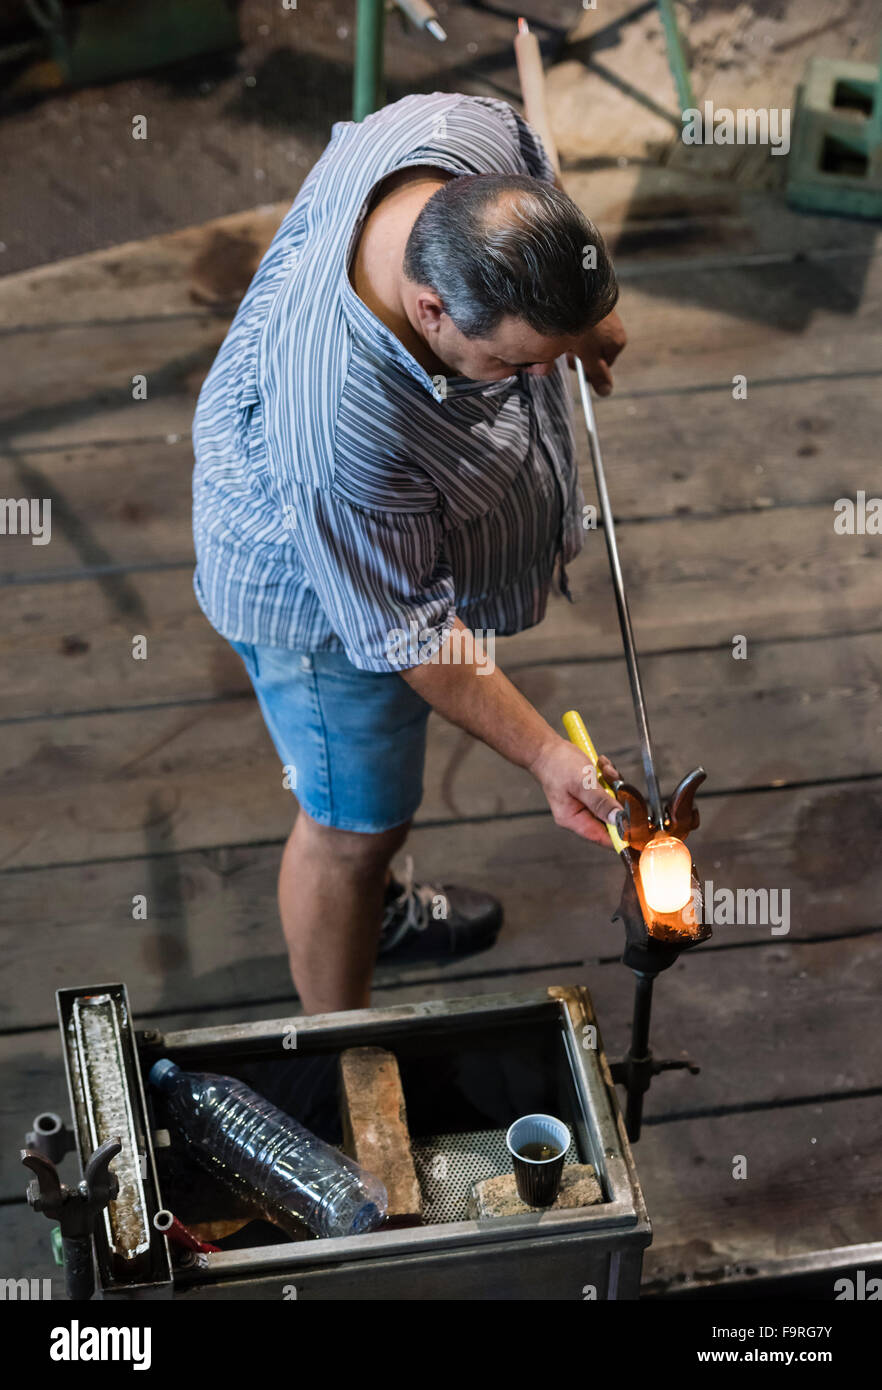 A glassblower at work in front of the furnace of the traditional glassblowing manufacture at Hergiswil, Switzerland. Stock Photo